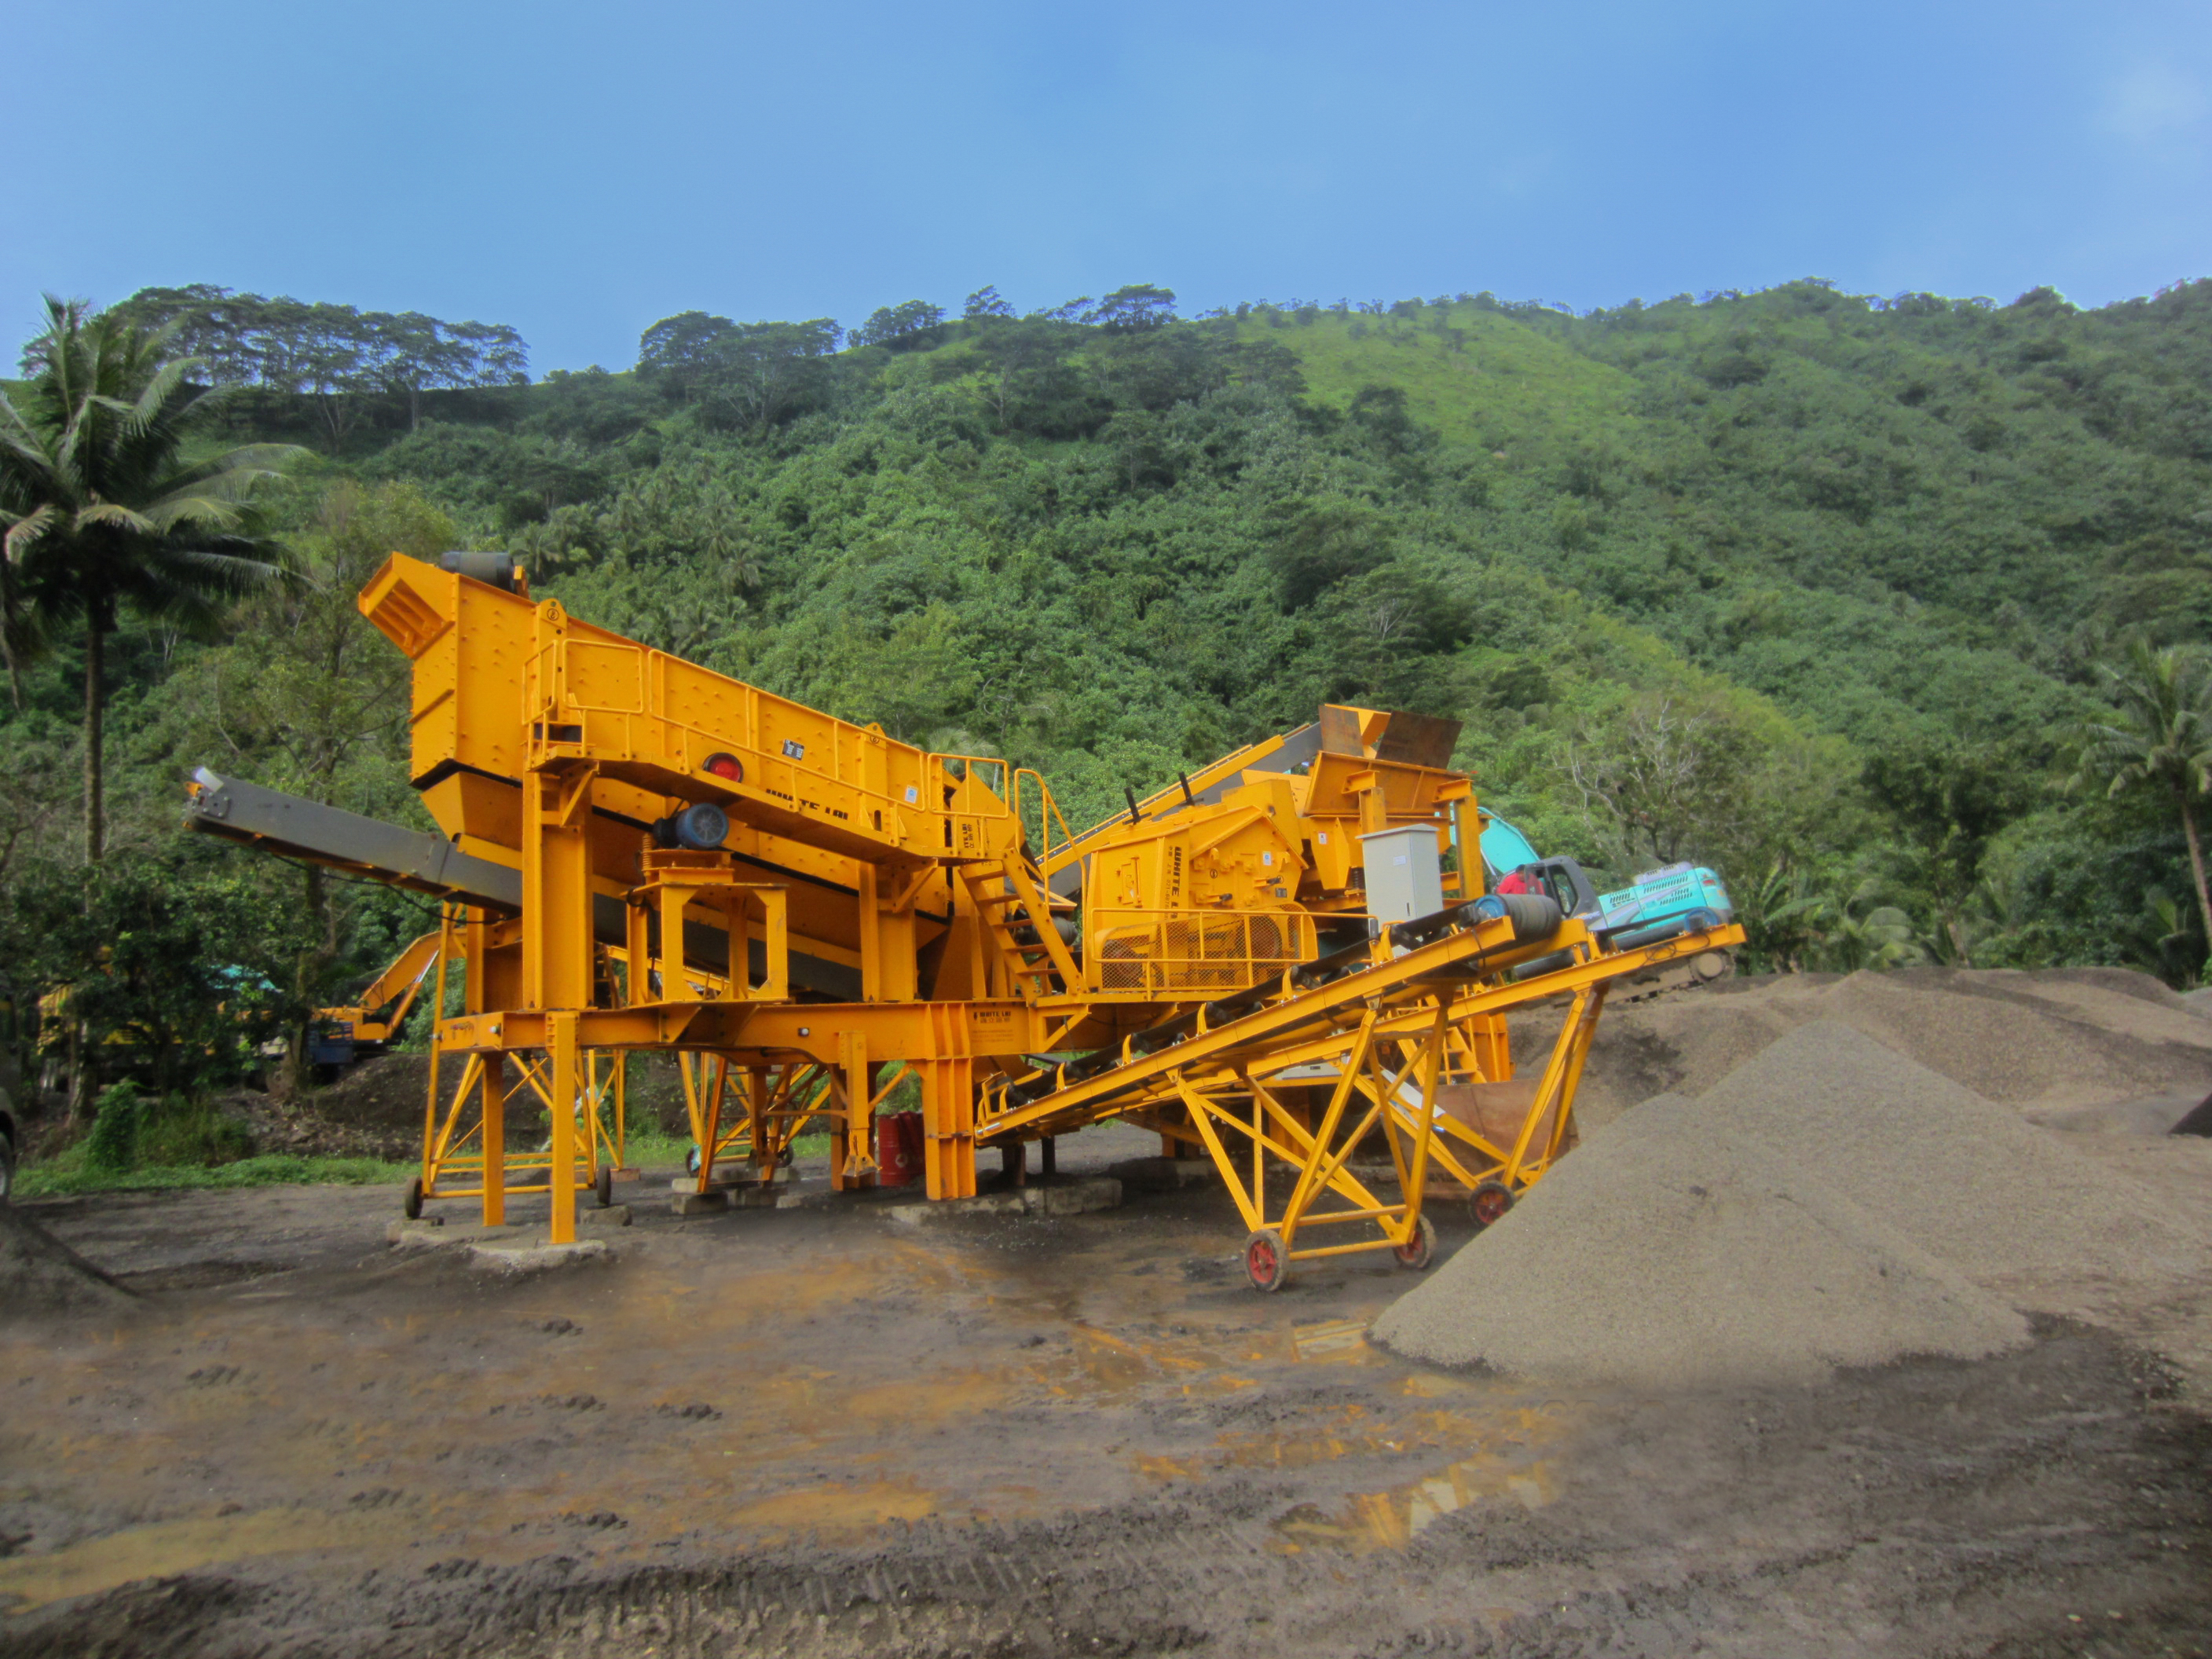 Mobile unit on tyres for pebble crushing plant in Polynesia